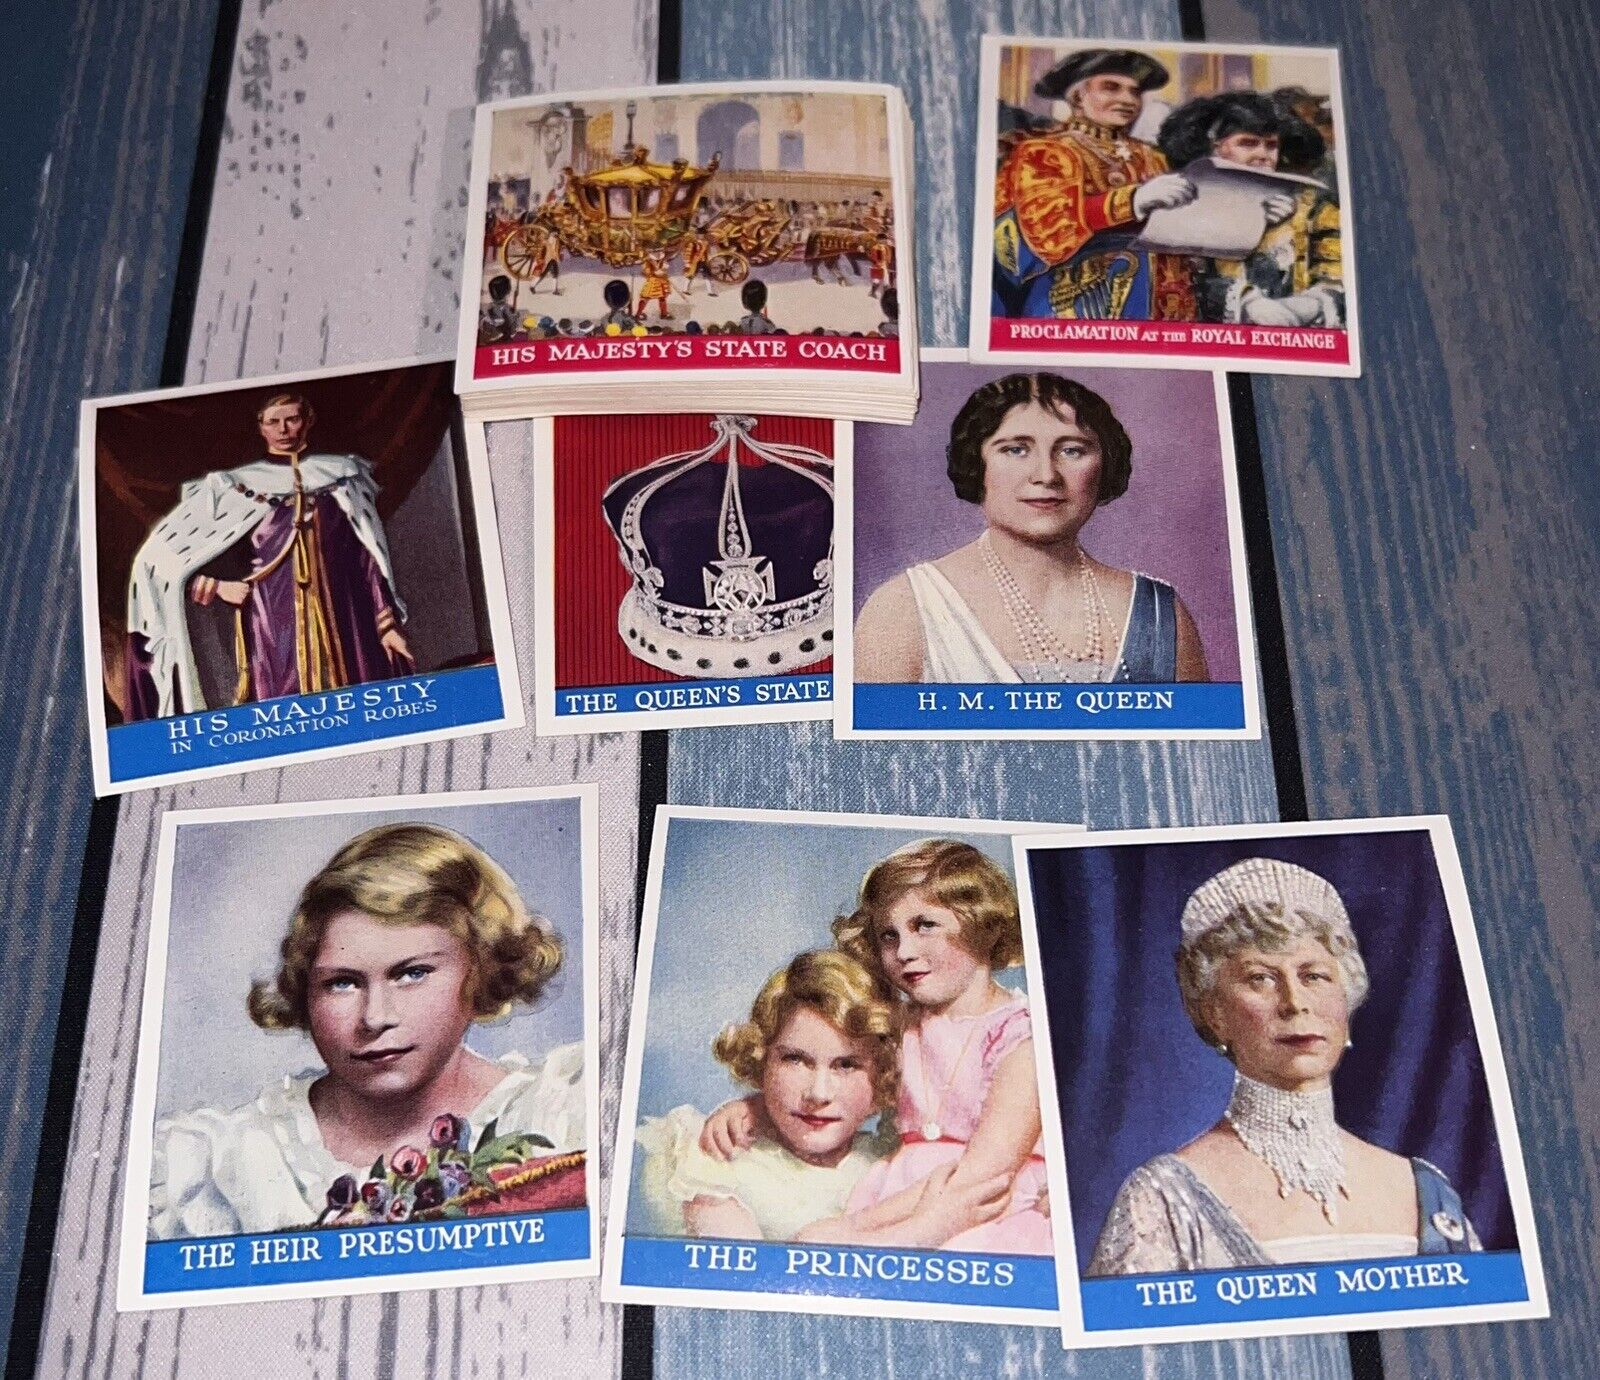 1937 GODFREY PHILLIPS CIGARETTES CORONATION OF THEIR MAJESTIES COMPLETE SET A